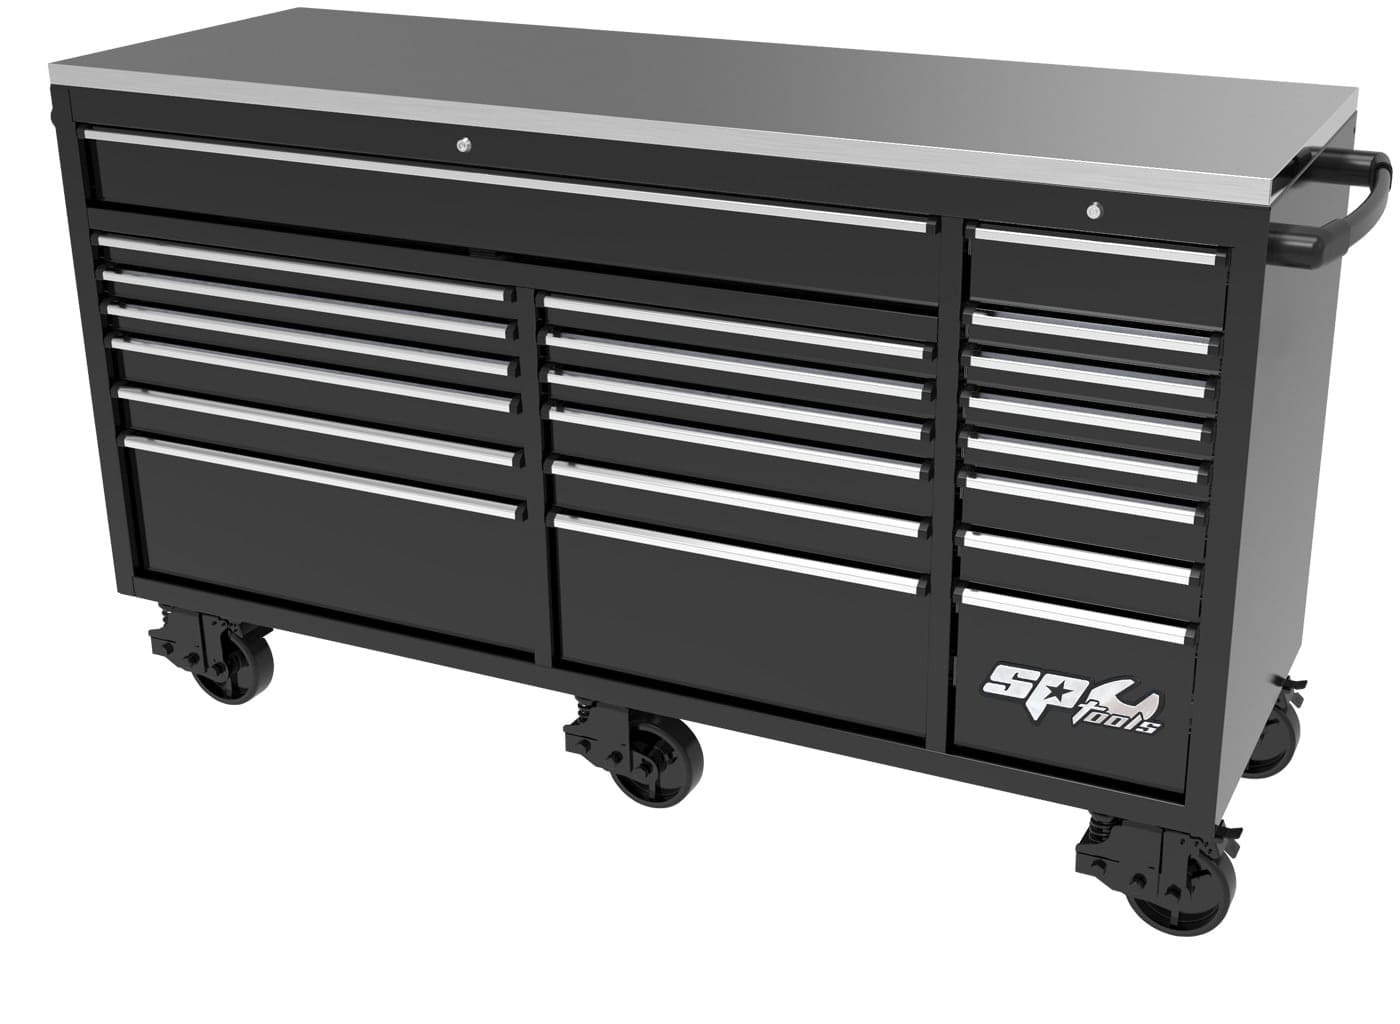 73" USA SUMO Series Wide Roller Cabinet, 21 Drawer by SP Tools